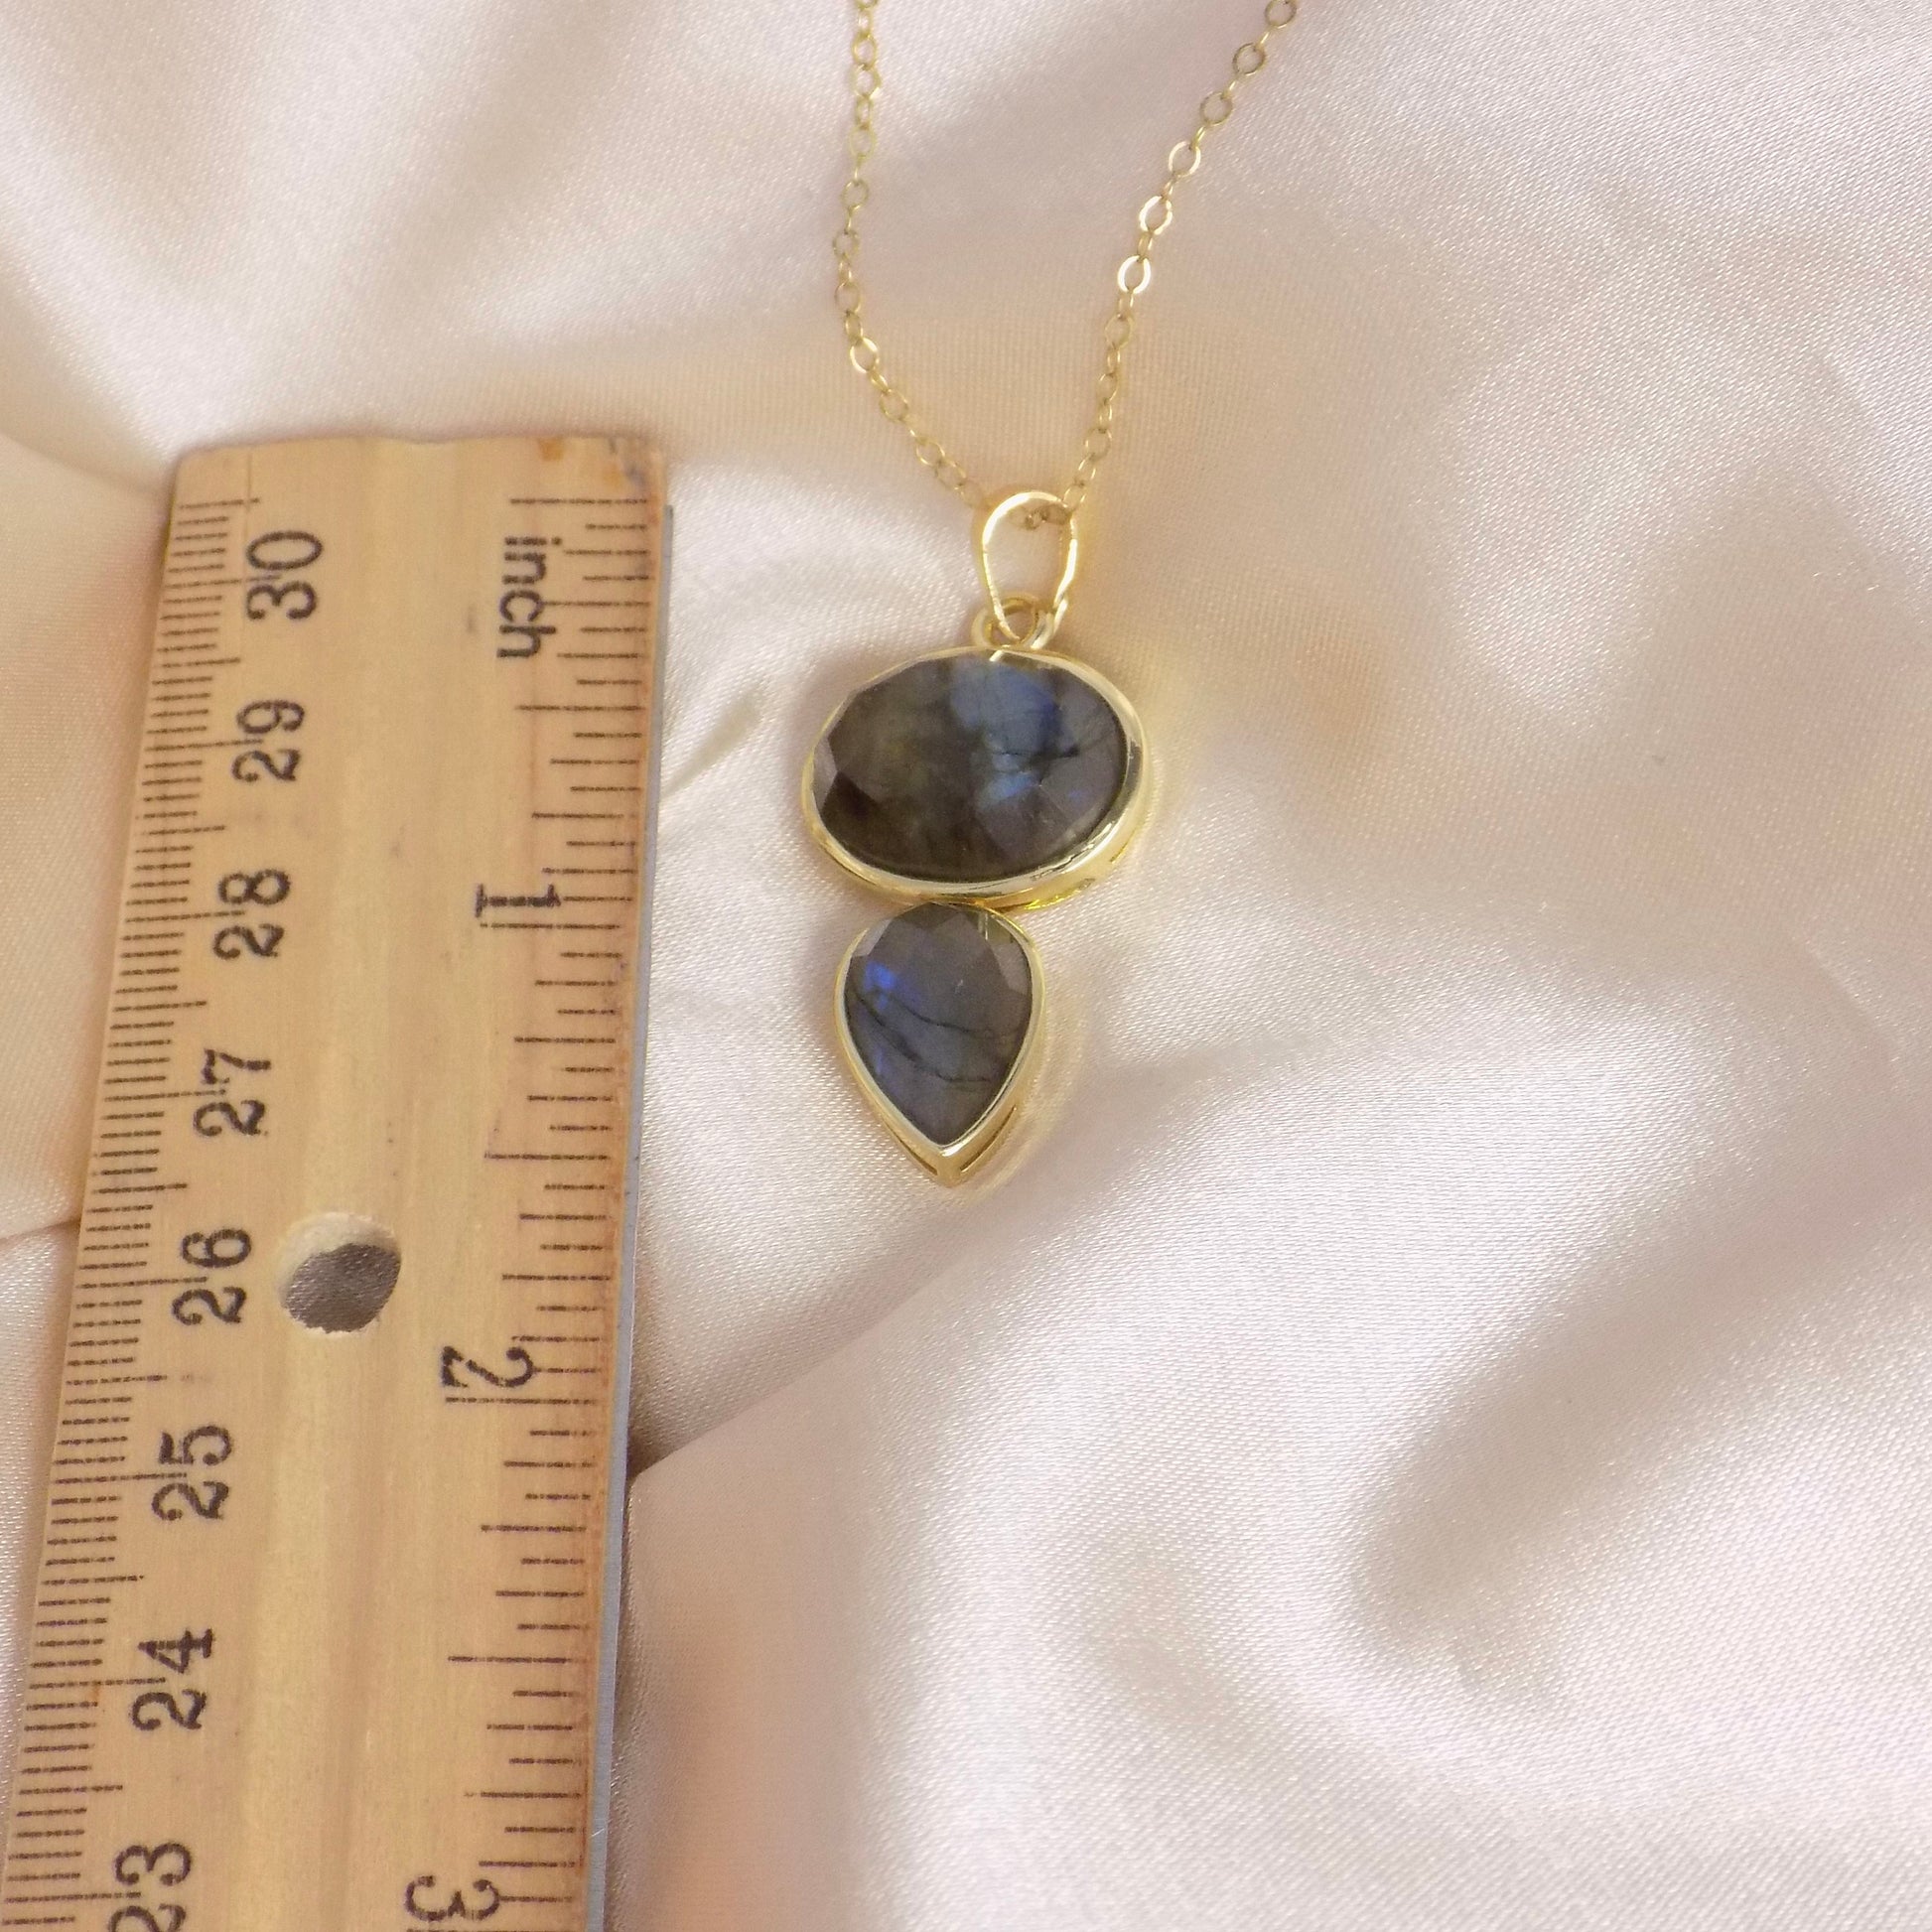 Labradorite Crystal Necklace with Blue Flash with 14K Gold Filled Chain, Christmas Gift For Mom, M7-67